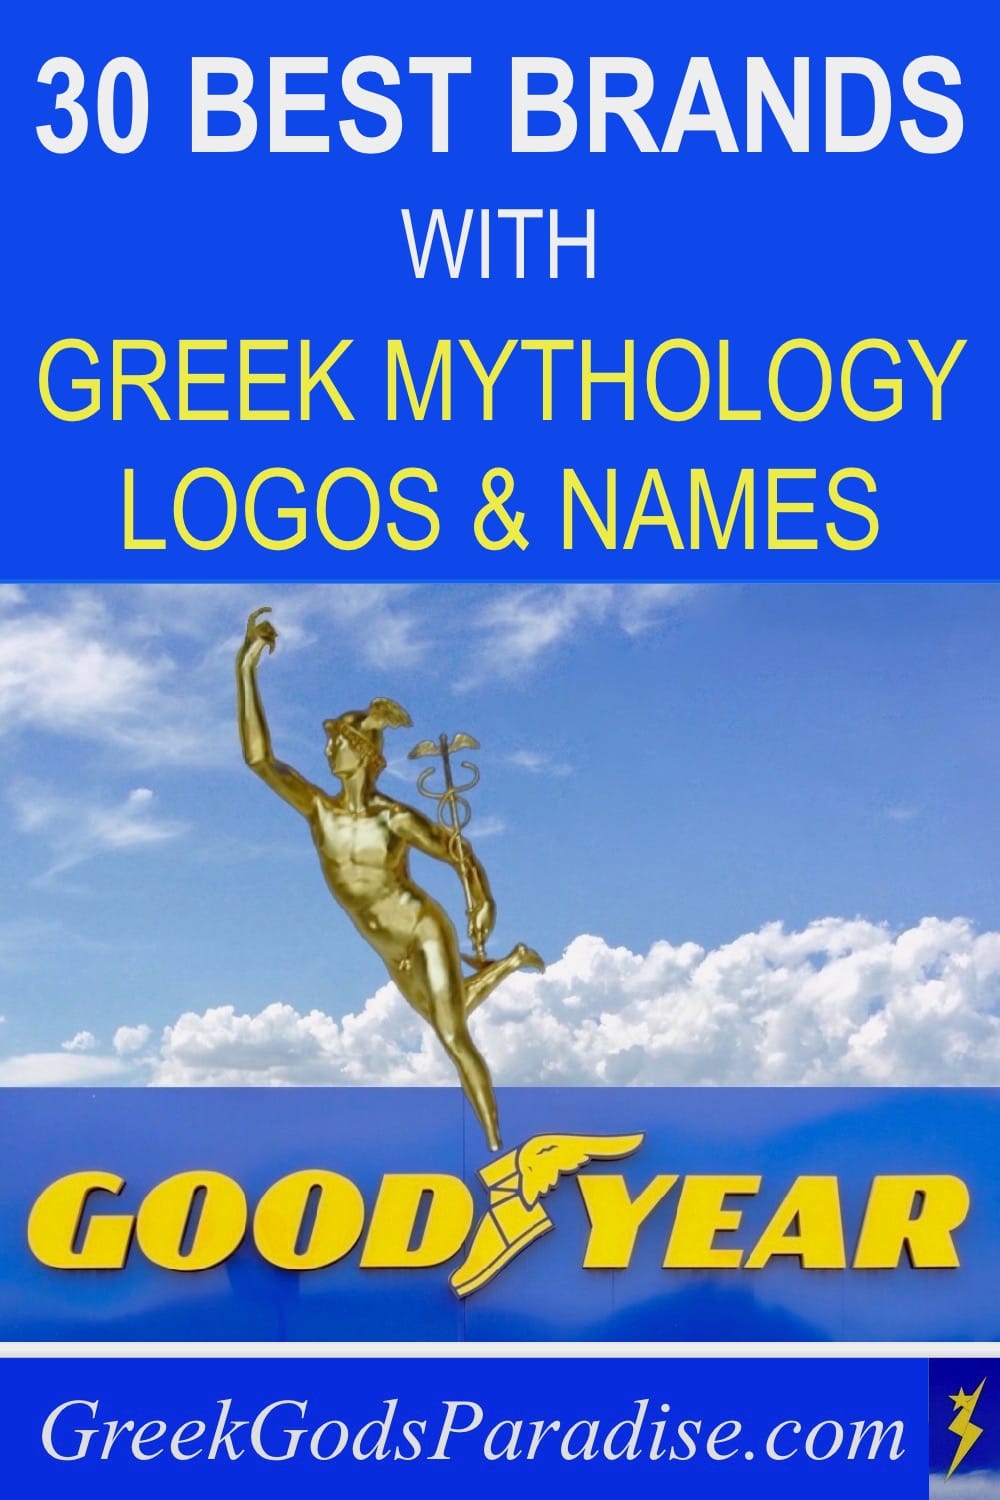 30 Best Brands with Greek Mythology Logos and Names